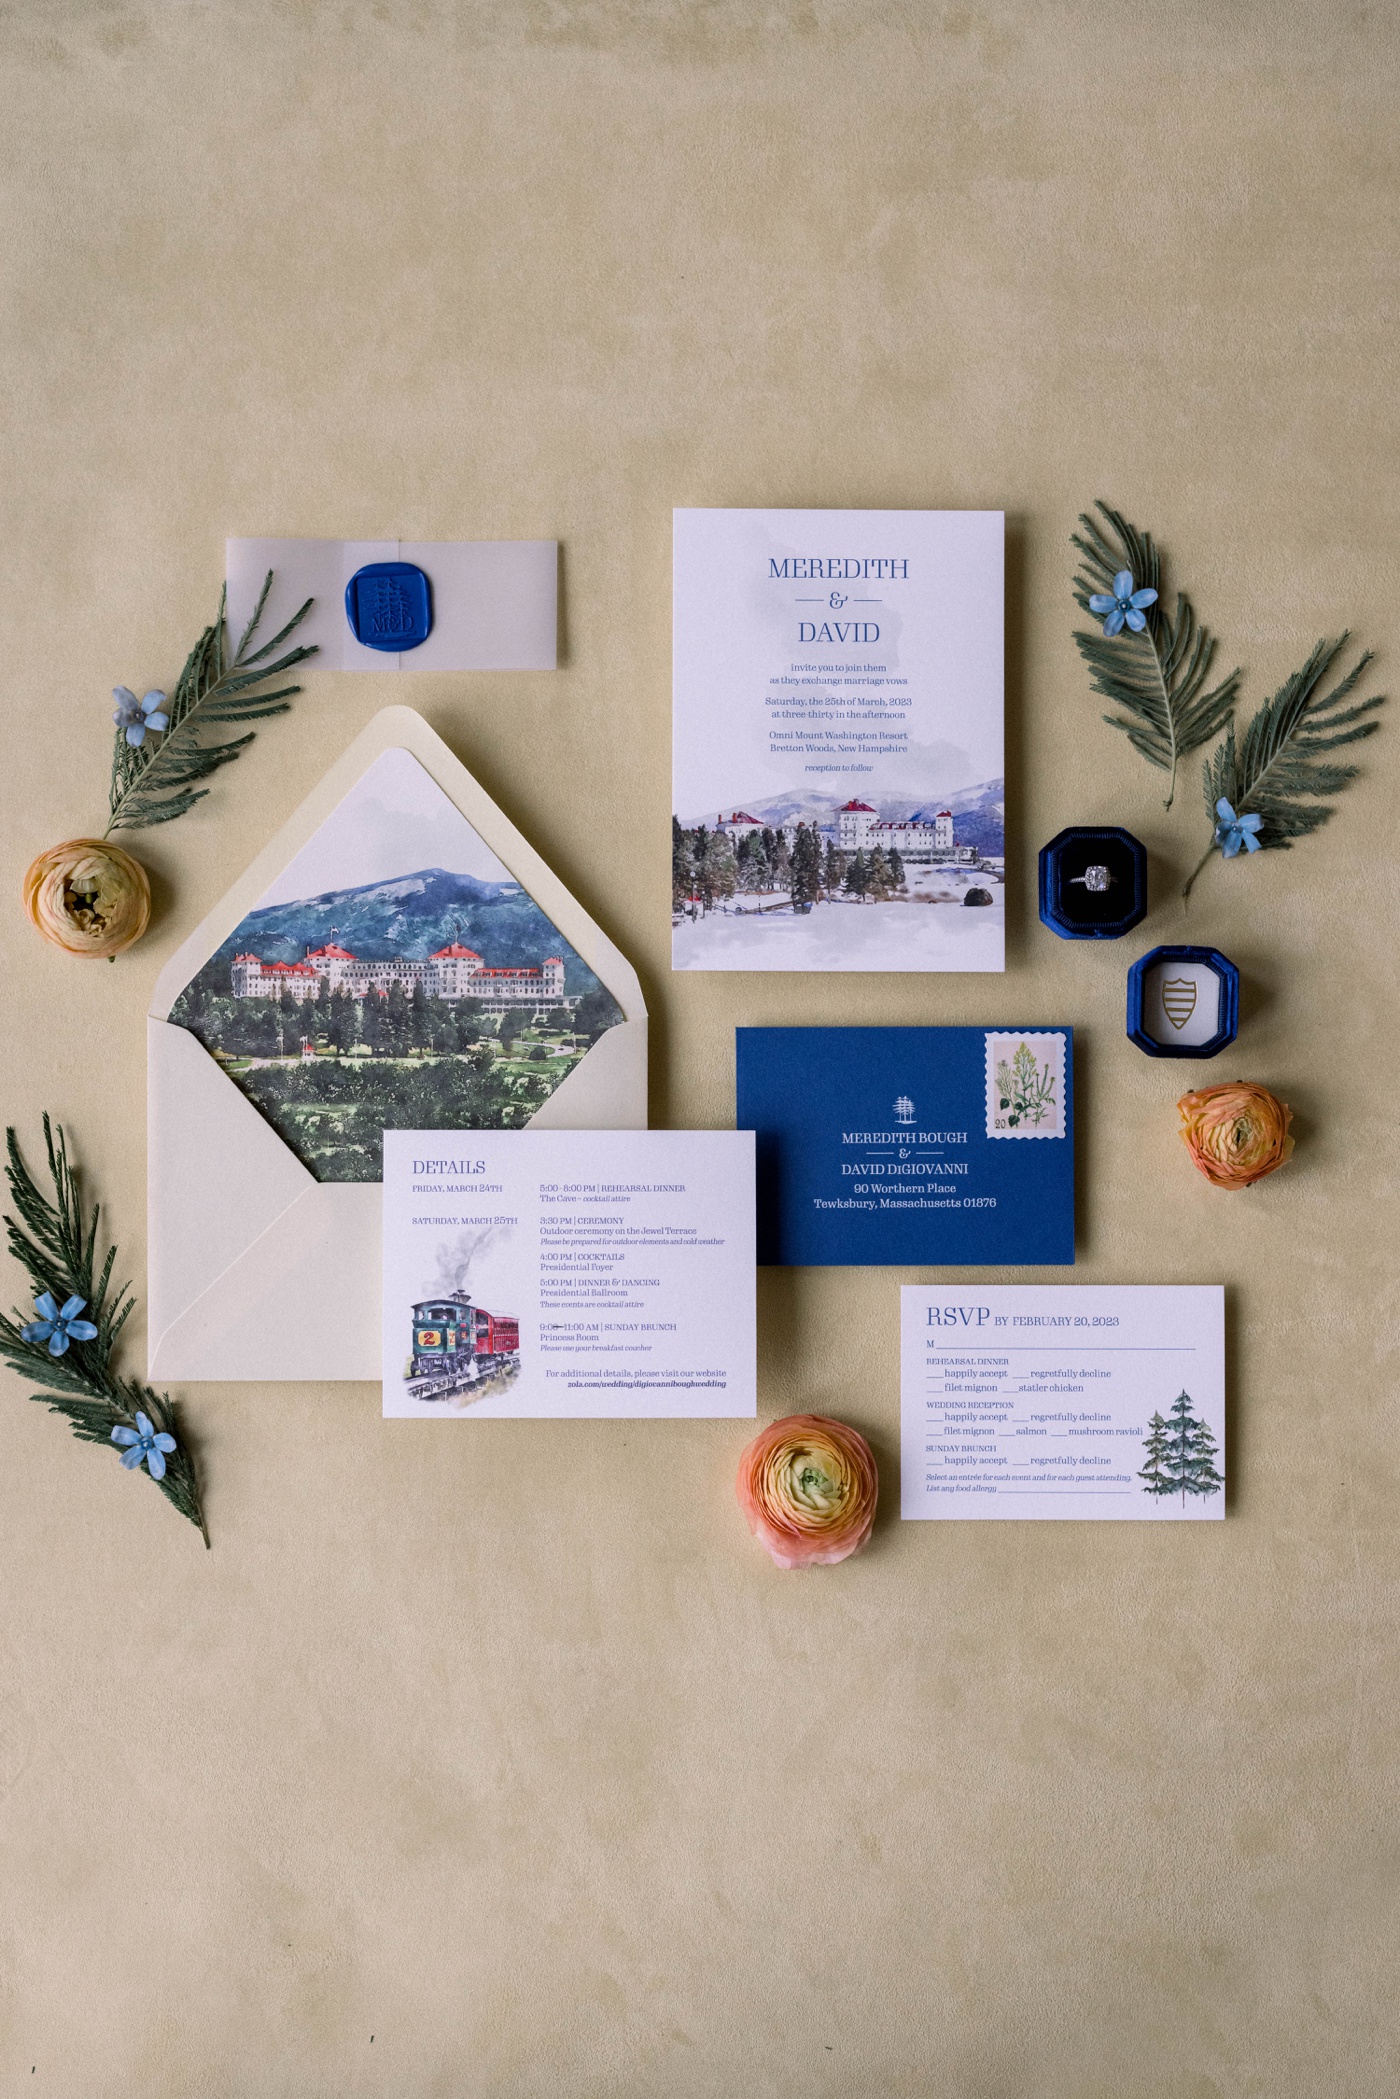 Royal blue and white wedding invitation suite by Impress Me Designs